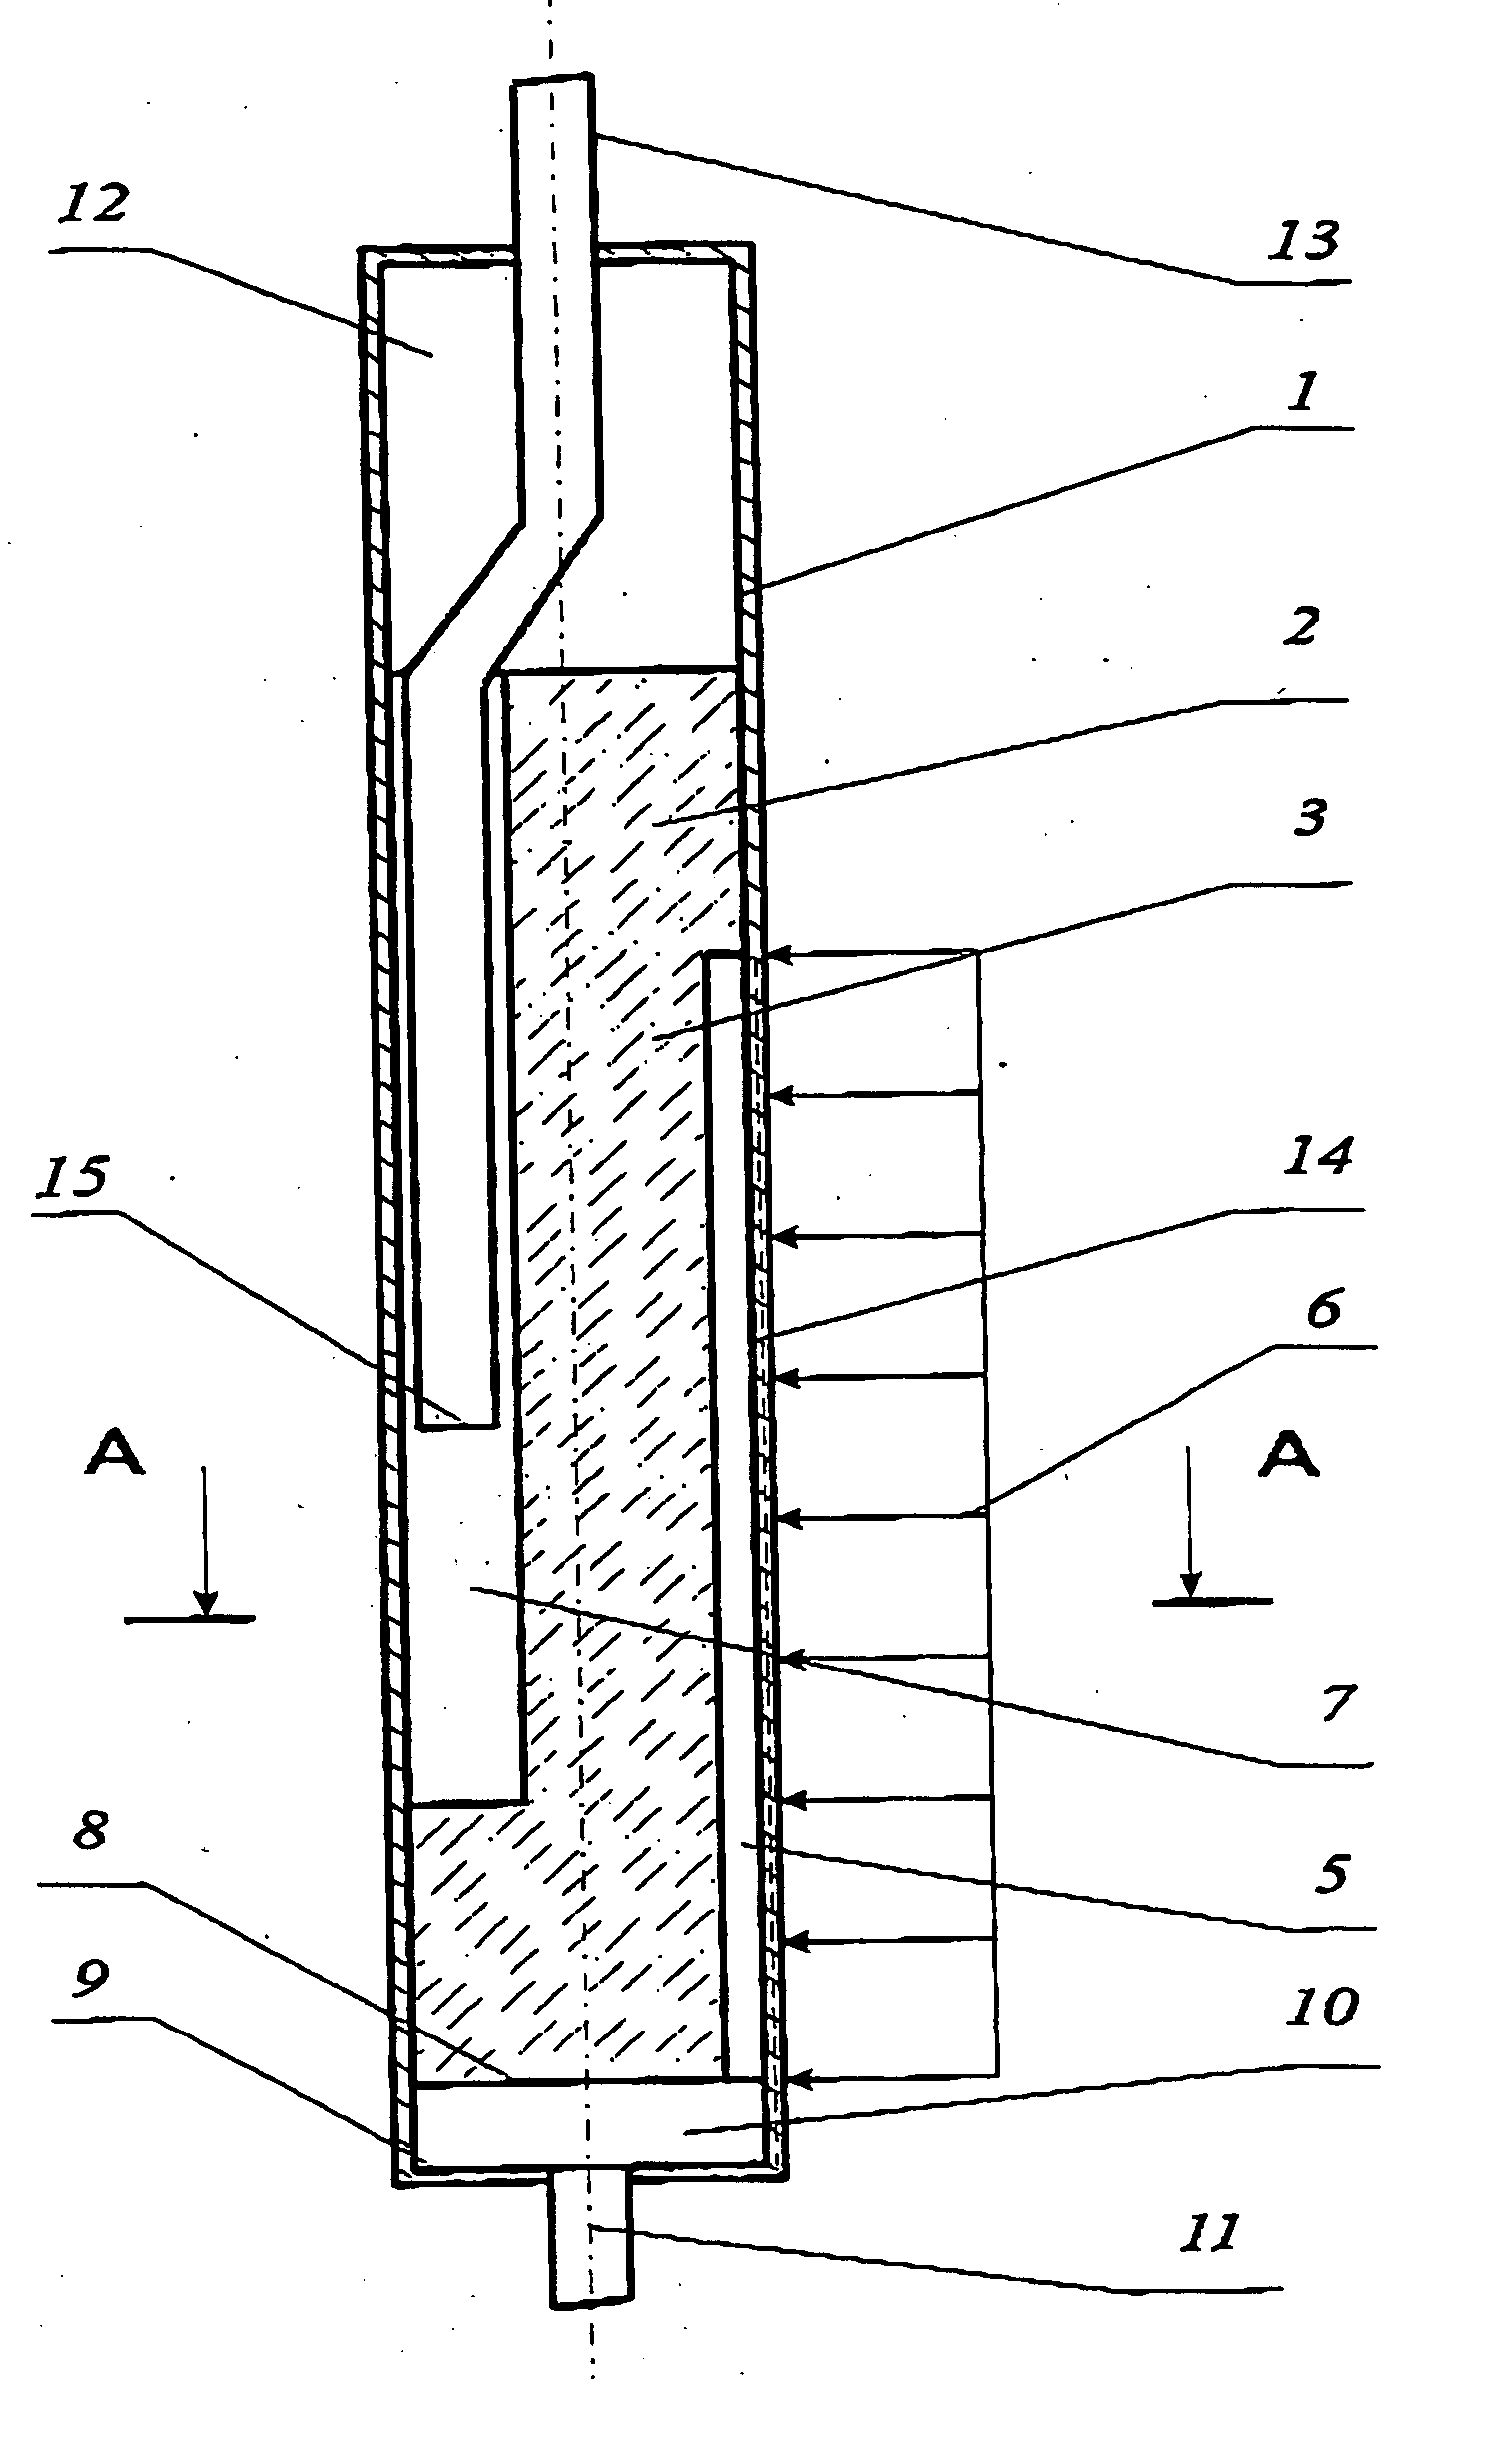 Evaporation chamber for a loop heat pipe